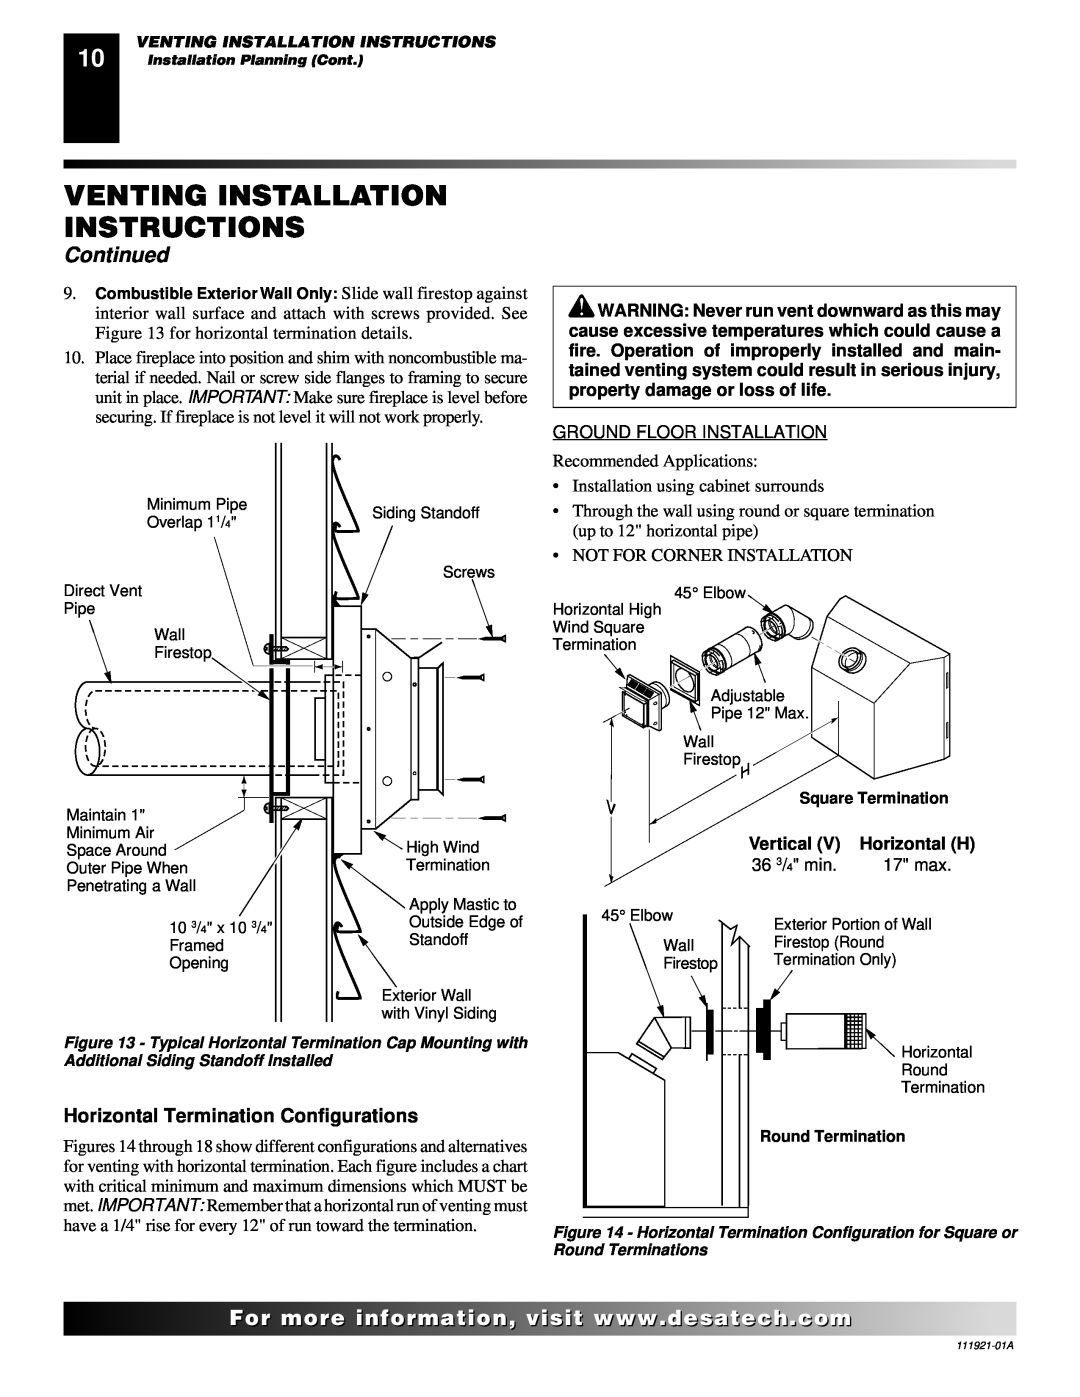 Desa (V)K42N Venting Installation Instructions, Continued, Square Termination, Vertical, Round Termination 